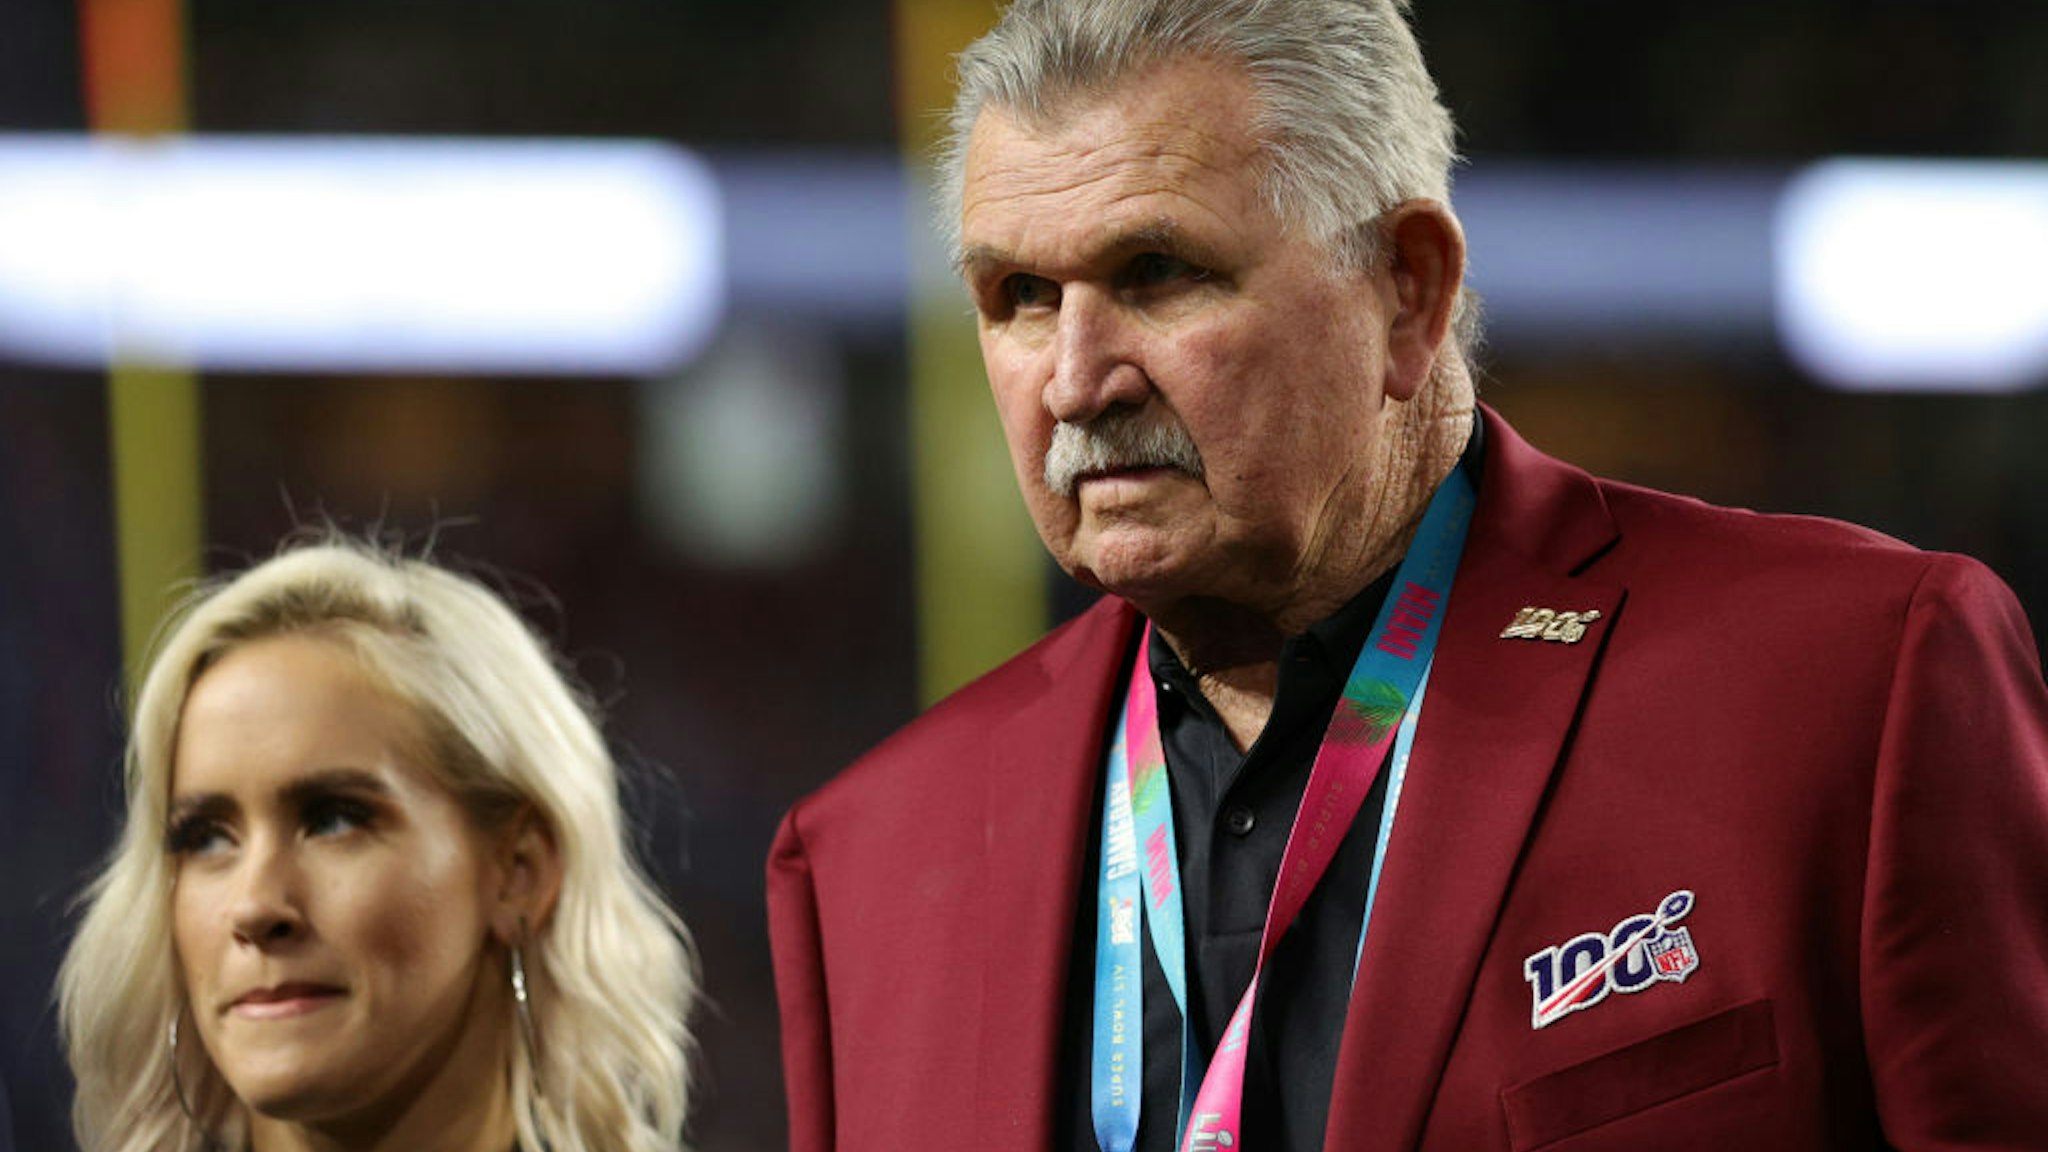 Mike Ditka of the NLF 100 All-Time Team is honored on the field prior to Super Bowl LIV between the San Francisco 49ers and the Kansas City Chiefs at Hard Rock Stadium on February 02, 2020 in Miami, Florida.